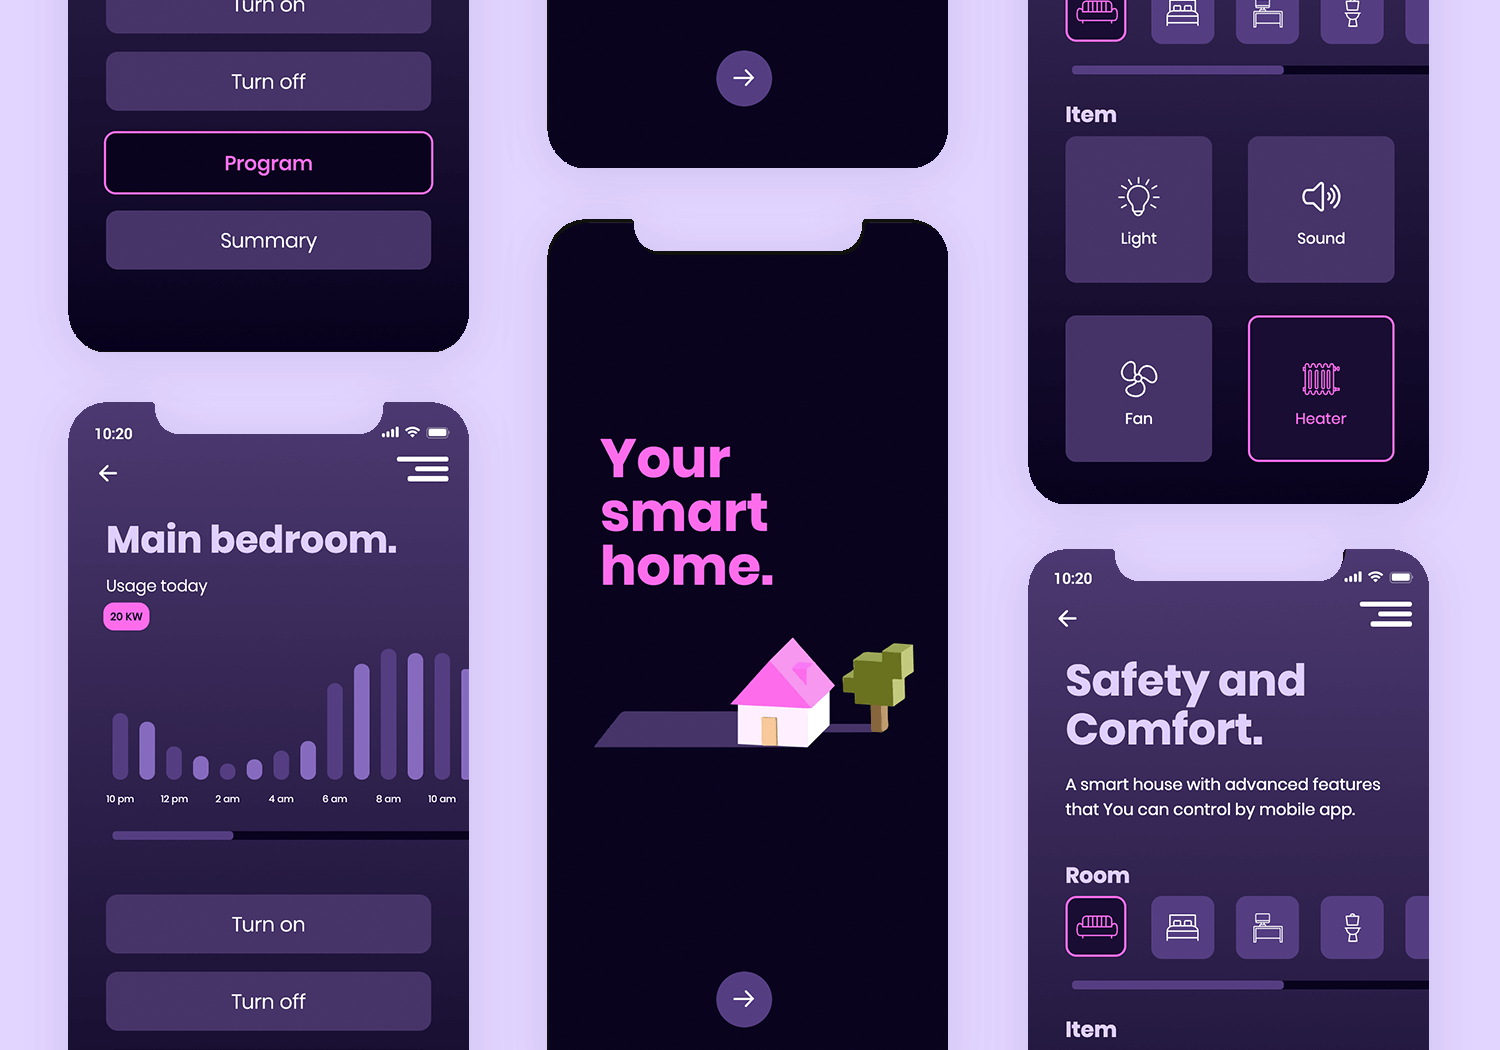 Smart home app mockup with a dark theme. Controls for lights, sound, fan, and heater. Includes usage stats and safety features.